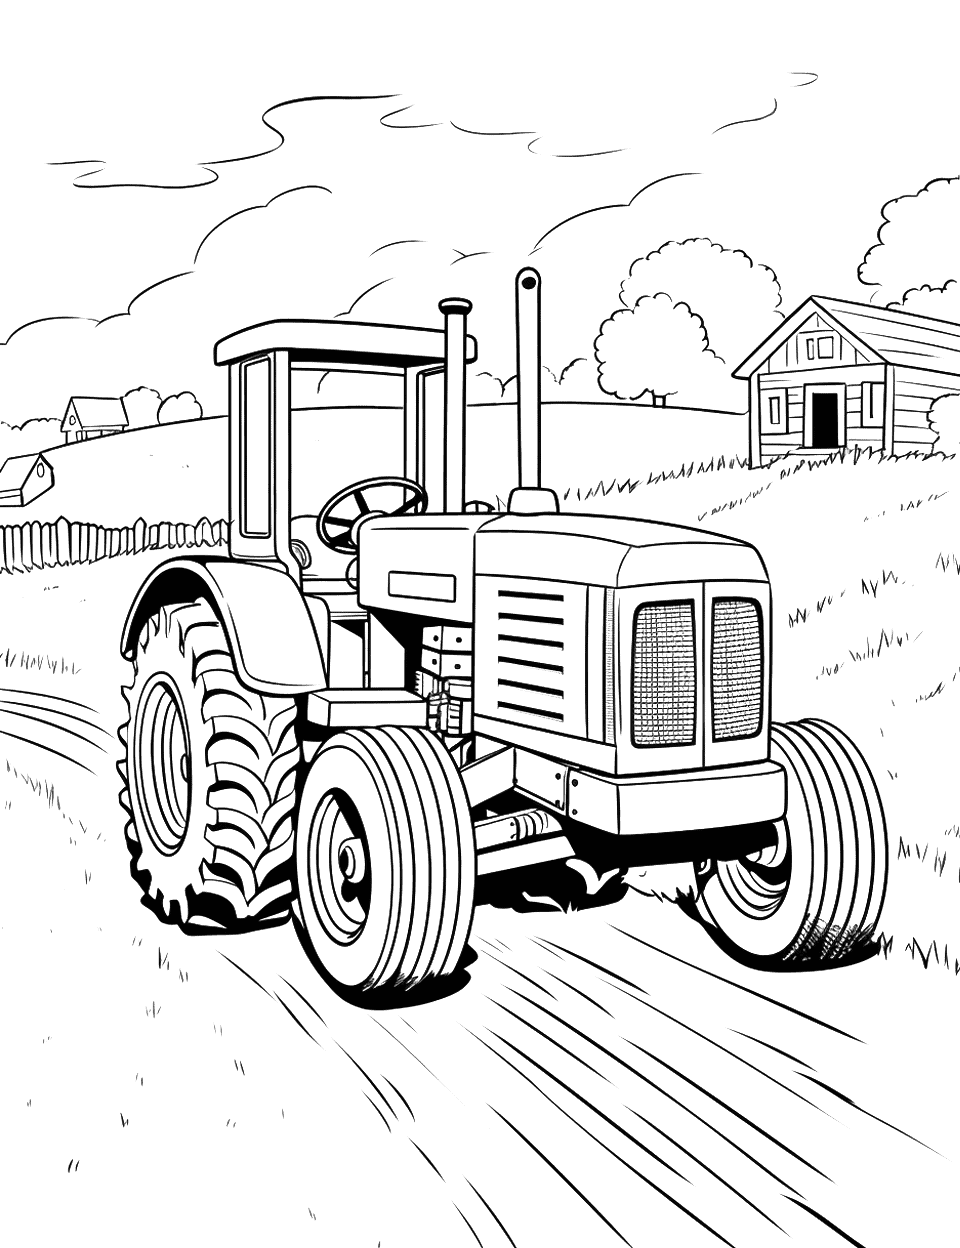 Tractor on a Country Road Coloring Page - A tractor driving along a simple country road, with fields on either side.